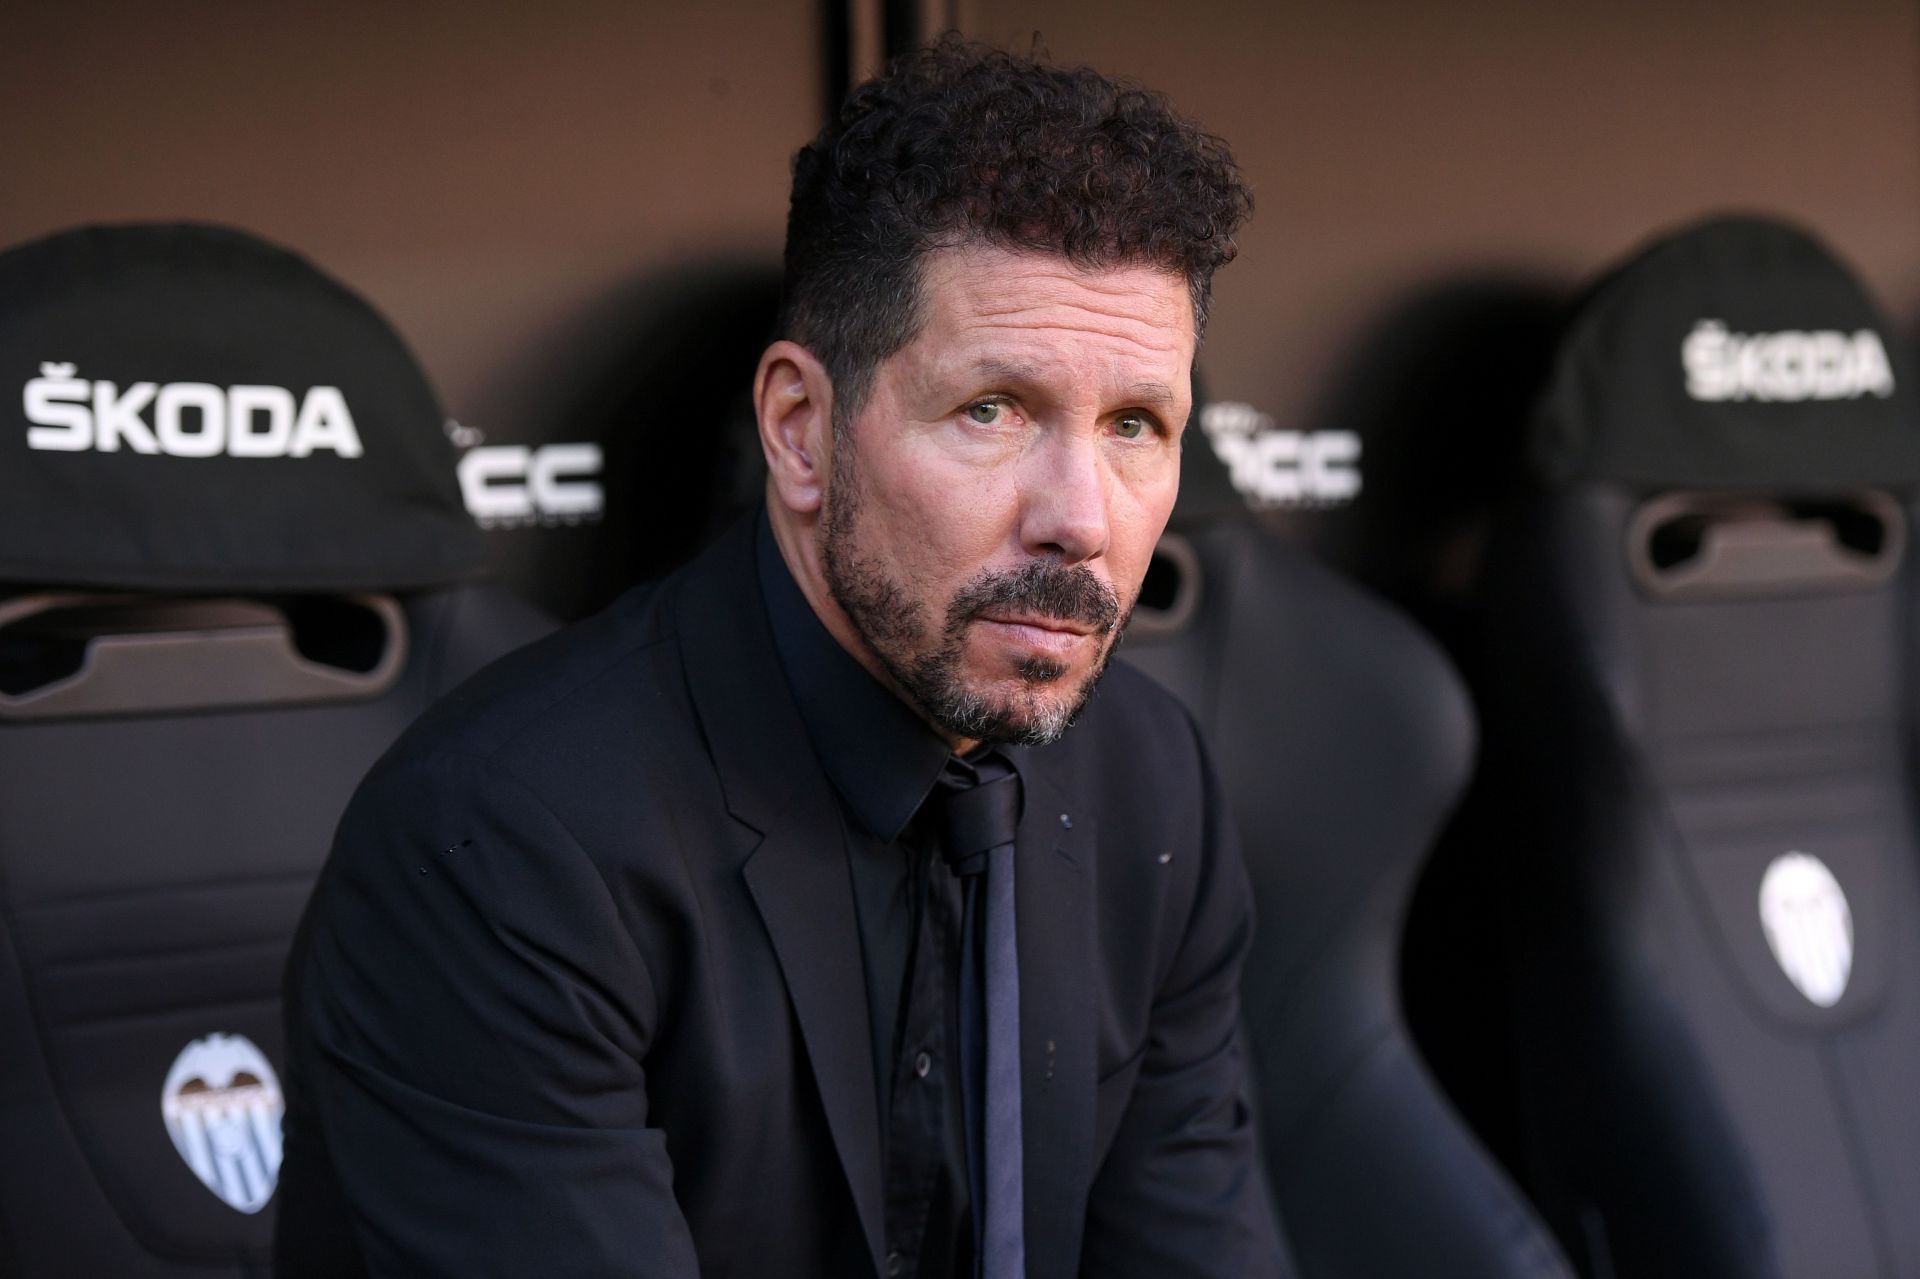 Atletico Madrid have already conceded more goals this season than last season with 16 games left to play